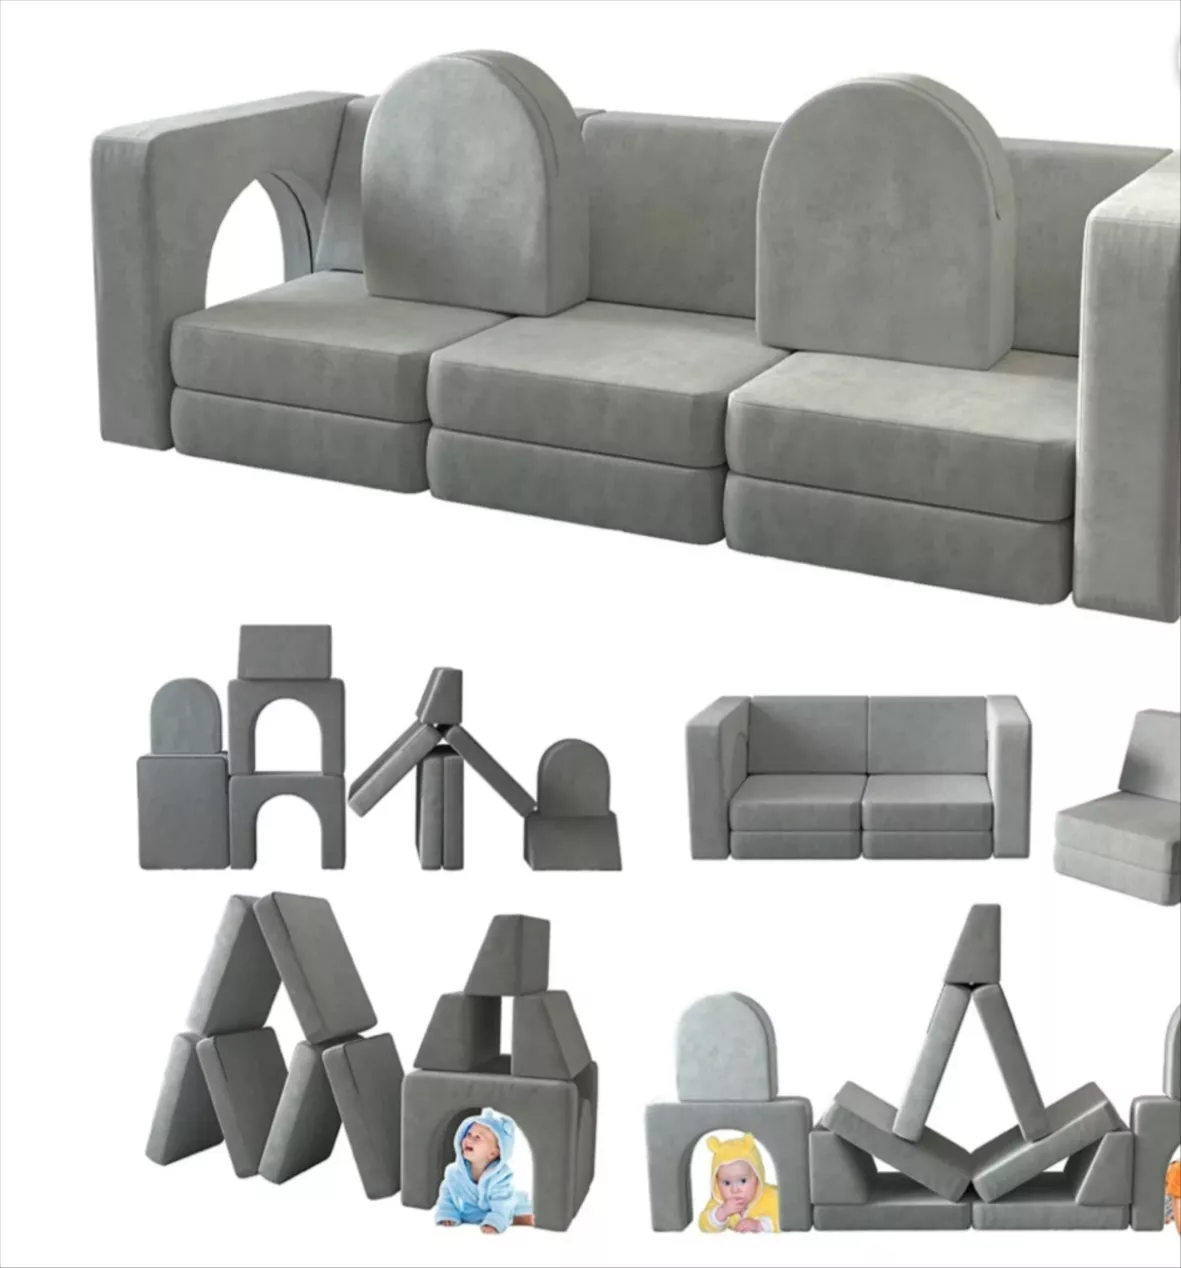 Kids Couch, Linor Toddler Couch Sofa for Kids, Modular Kids Sofa